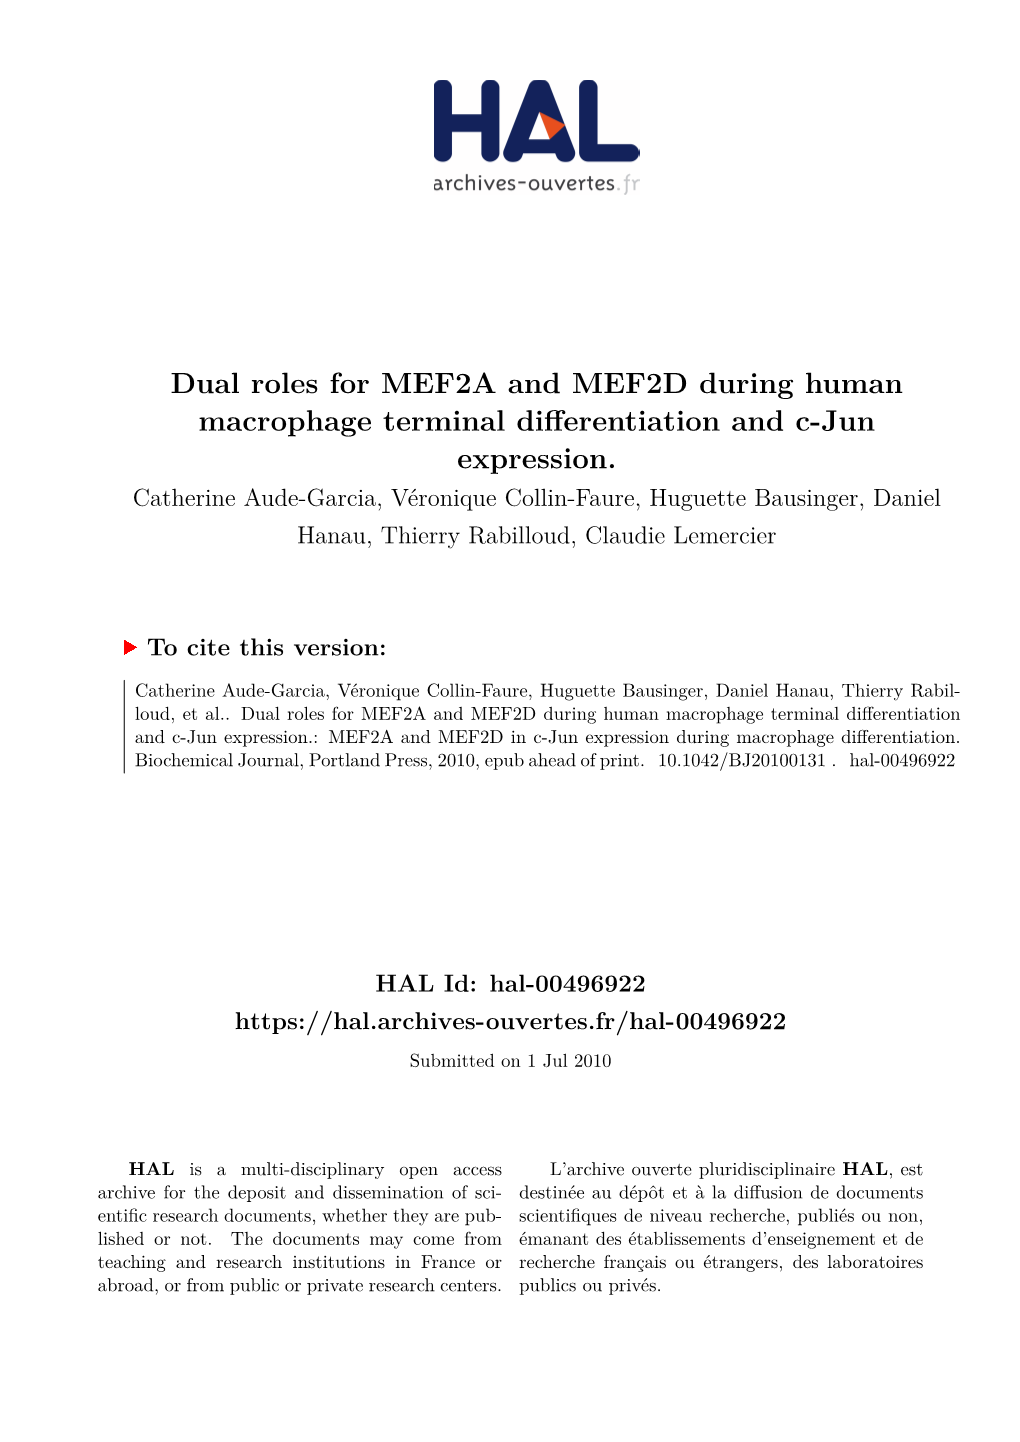 Dual Roles for MEF2A and MEF2D During Human Macrophage Terminal Differentiation and C-Jun Expression